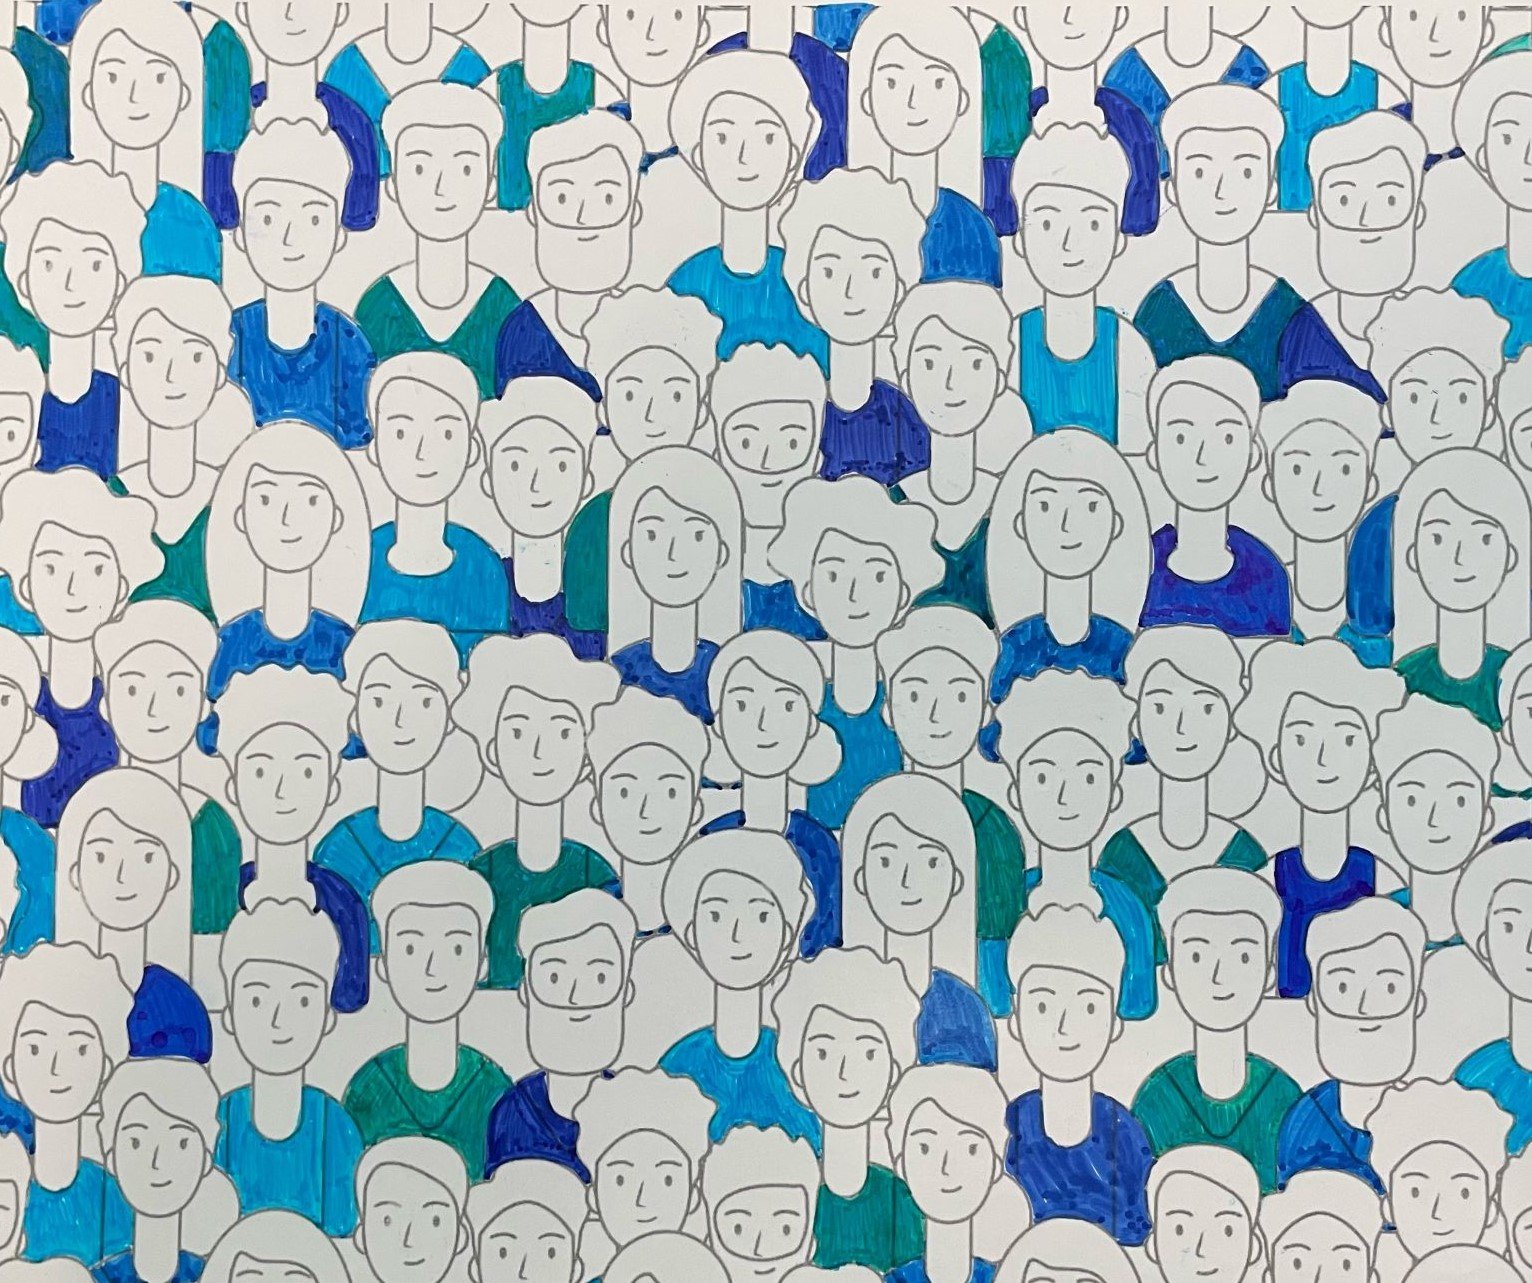 Clip art of crowd with different shades of blue t-shirts